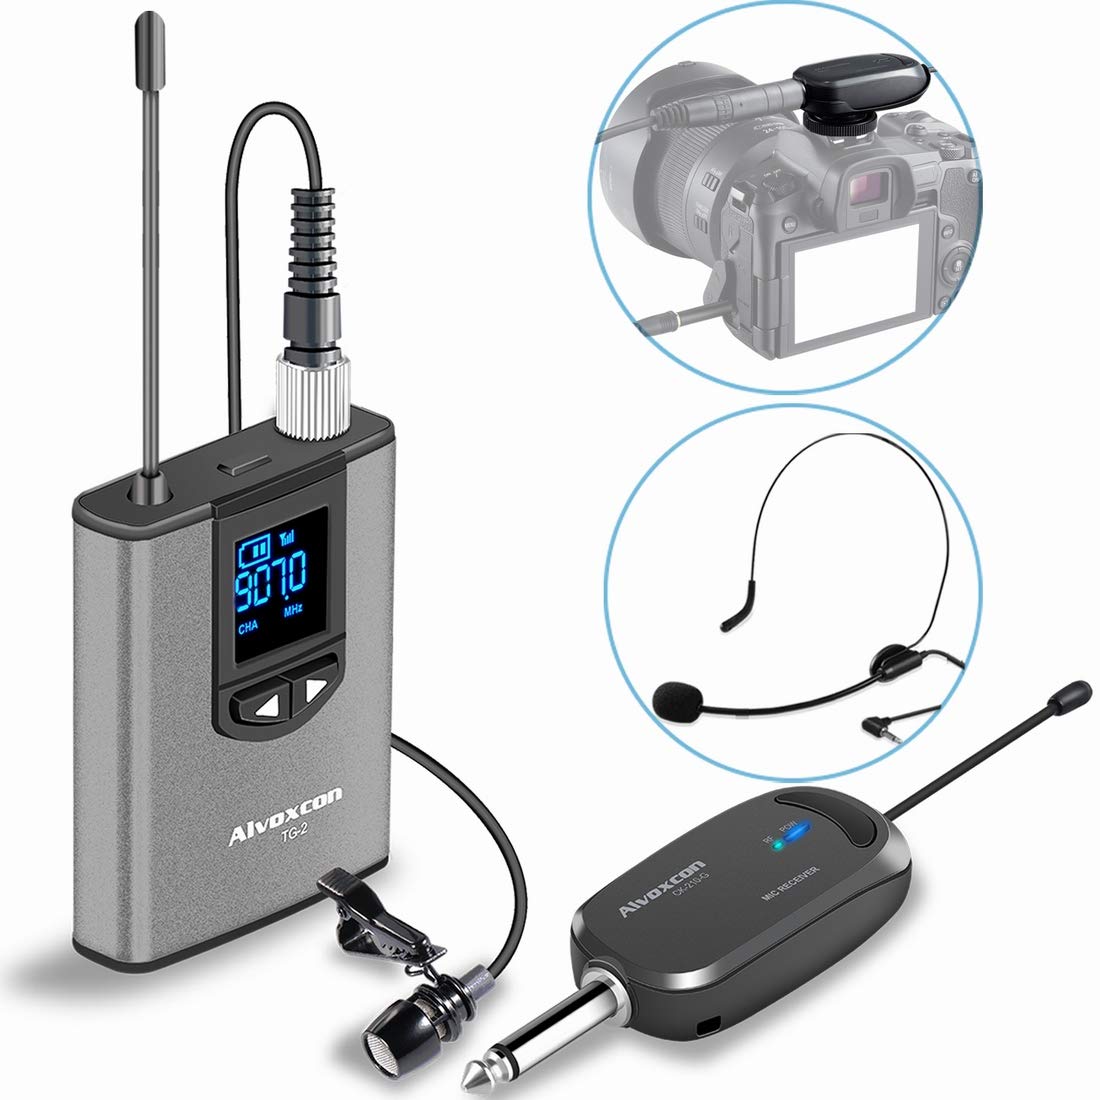 Wireless Headset Lavalier Microphone System for iPhone, DSLR Camera, Youtube - Nefficar